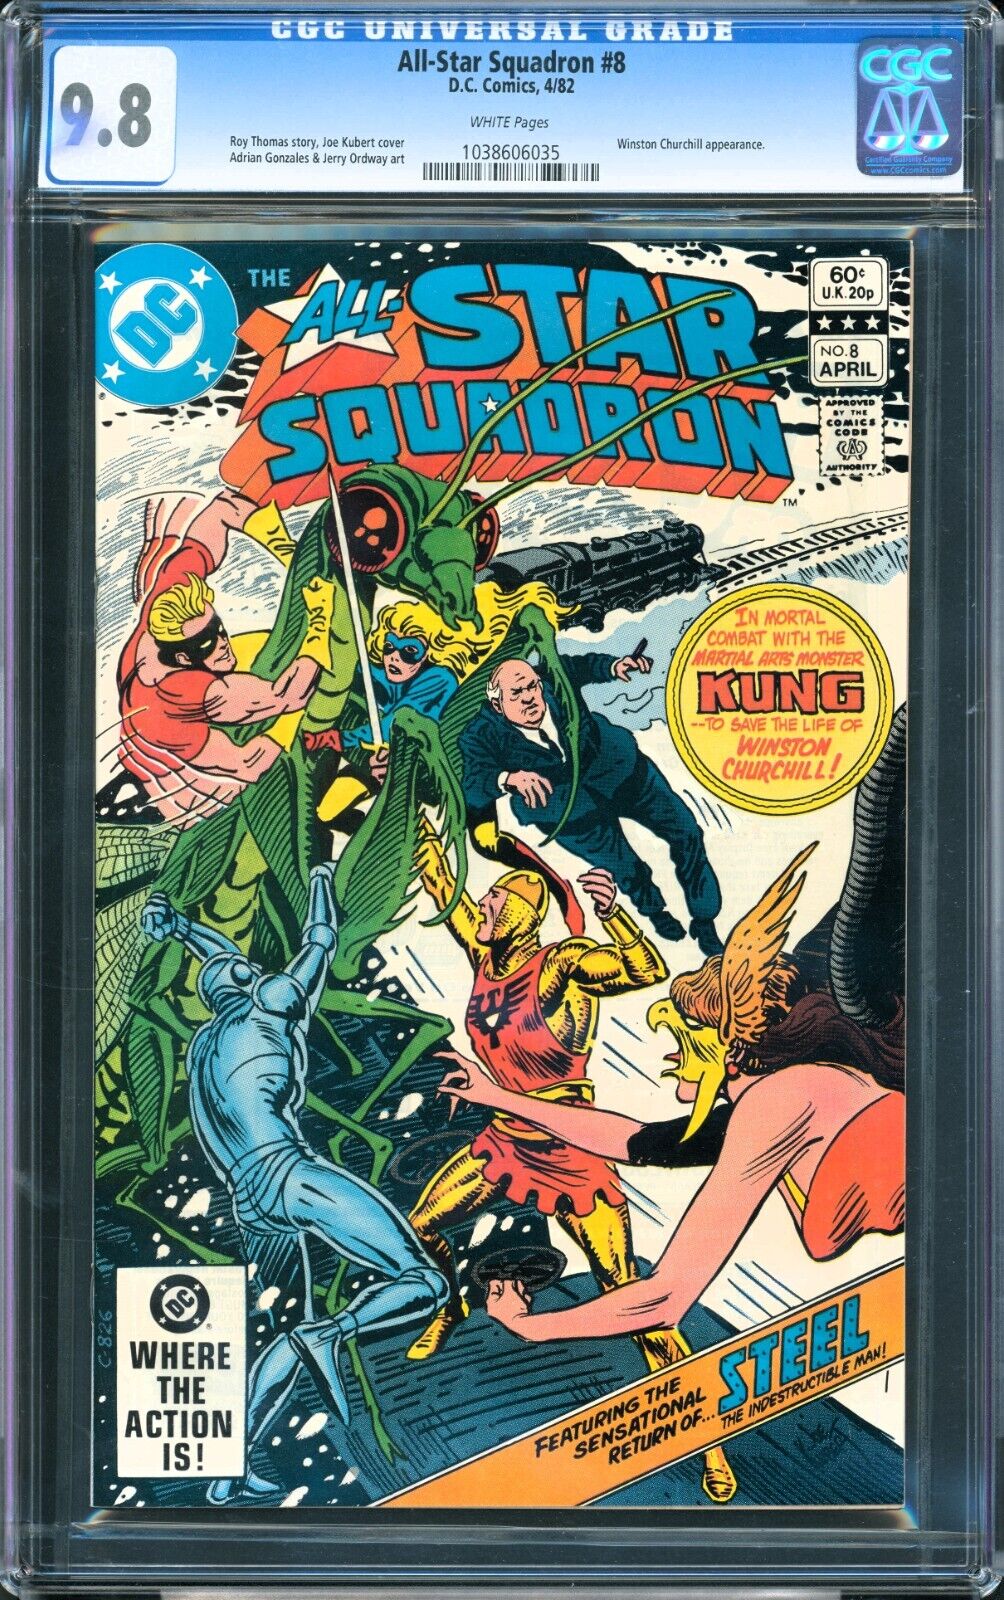 All-Star Squadron #8 CGC 9.8 White Pages (1982)- Winston Churchill app